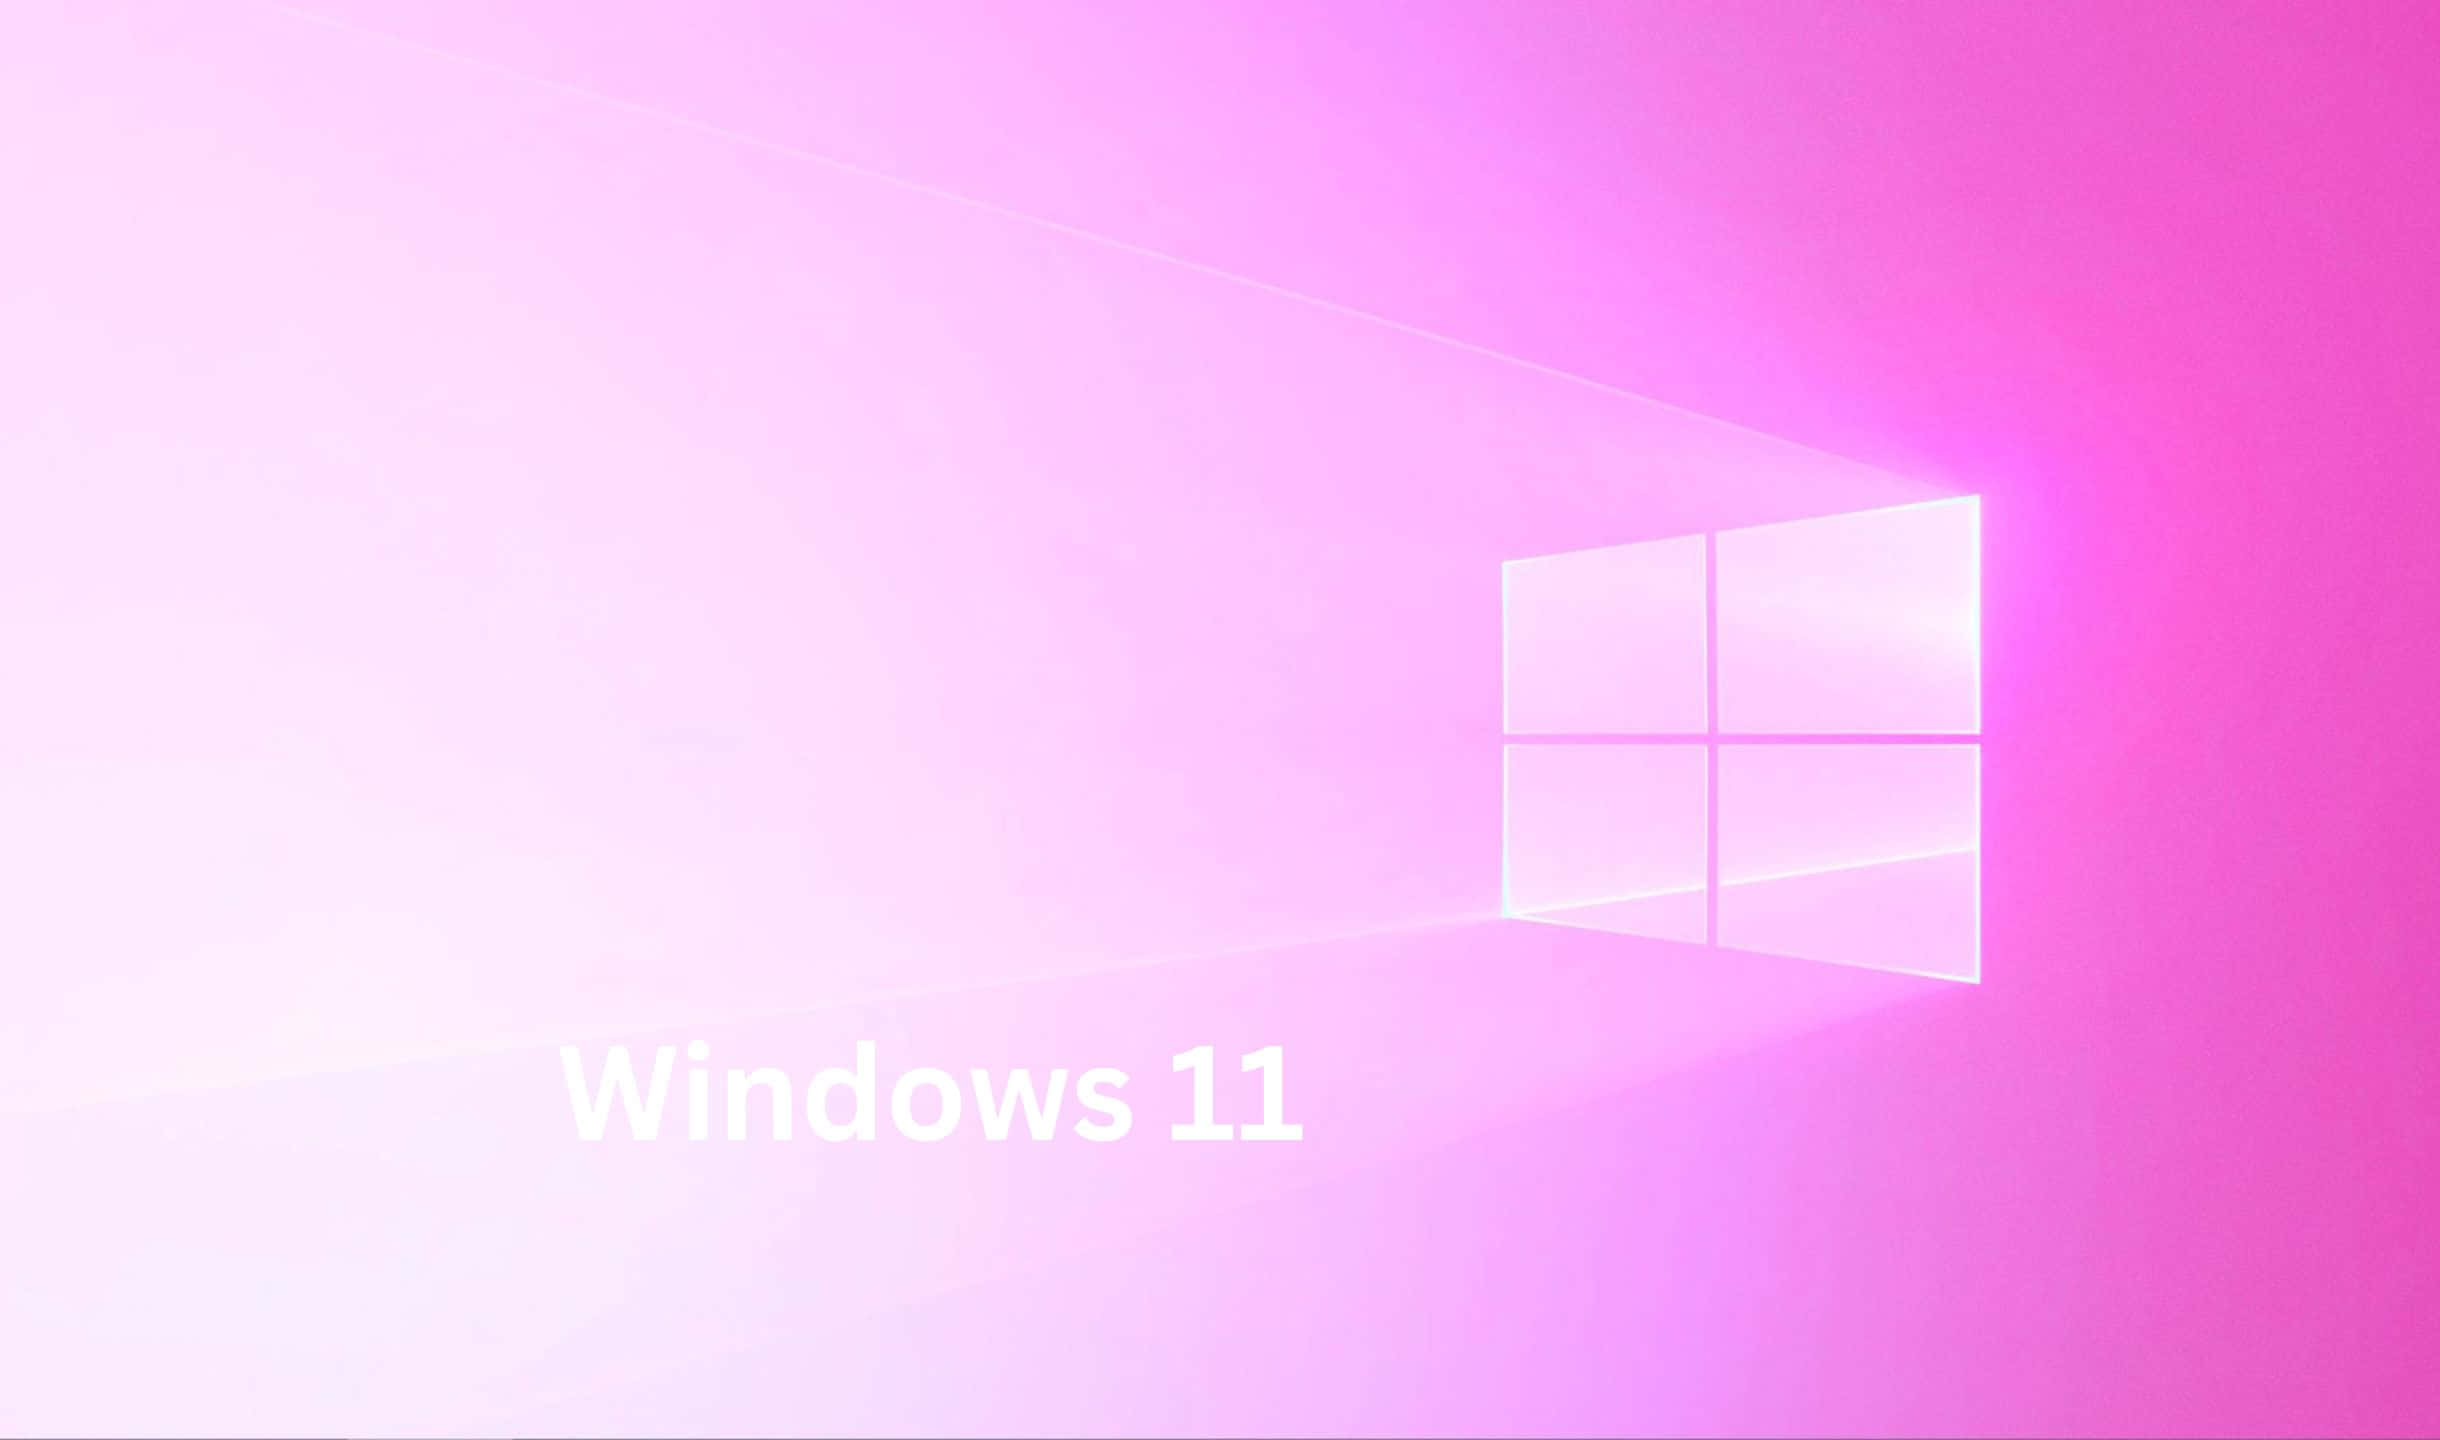 Be Future Ready - Welcome to Windows 11